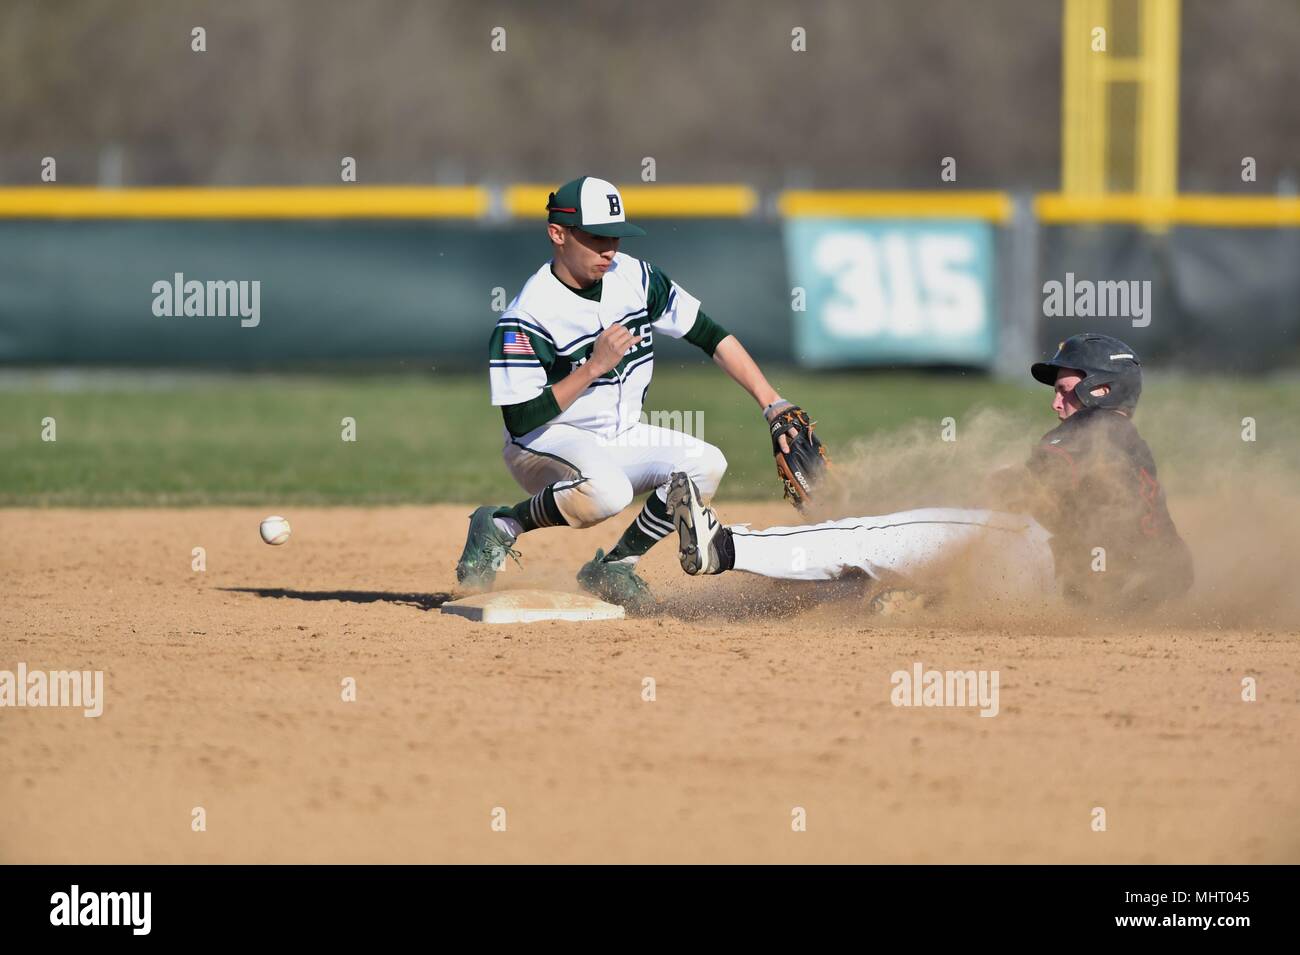 A second baseman was unable to handle the throw from right field as the opposing team's runner slid in safely. USA. Stock Photo